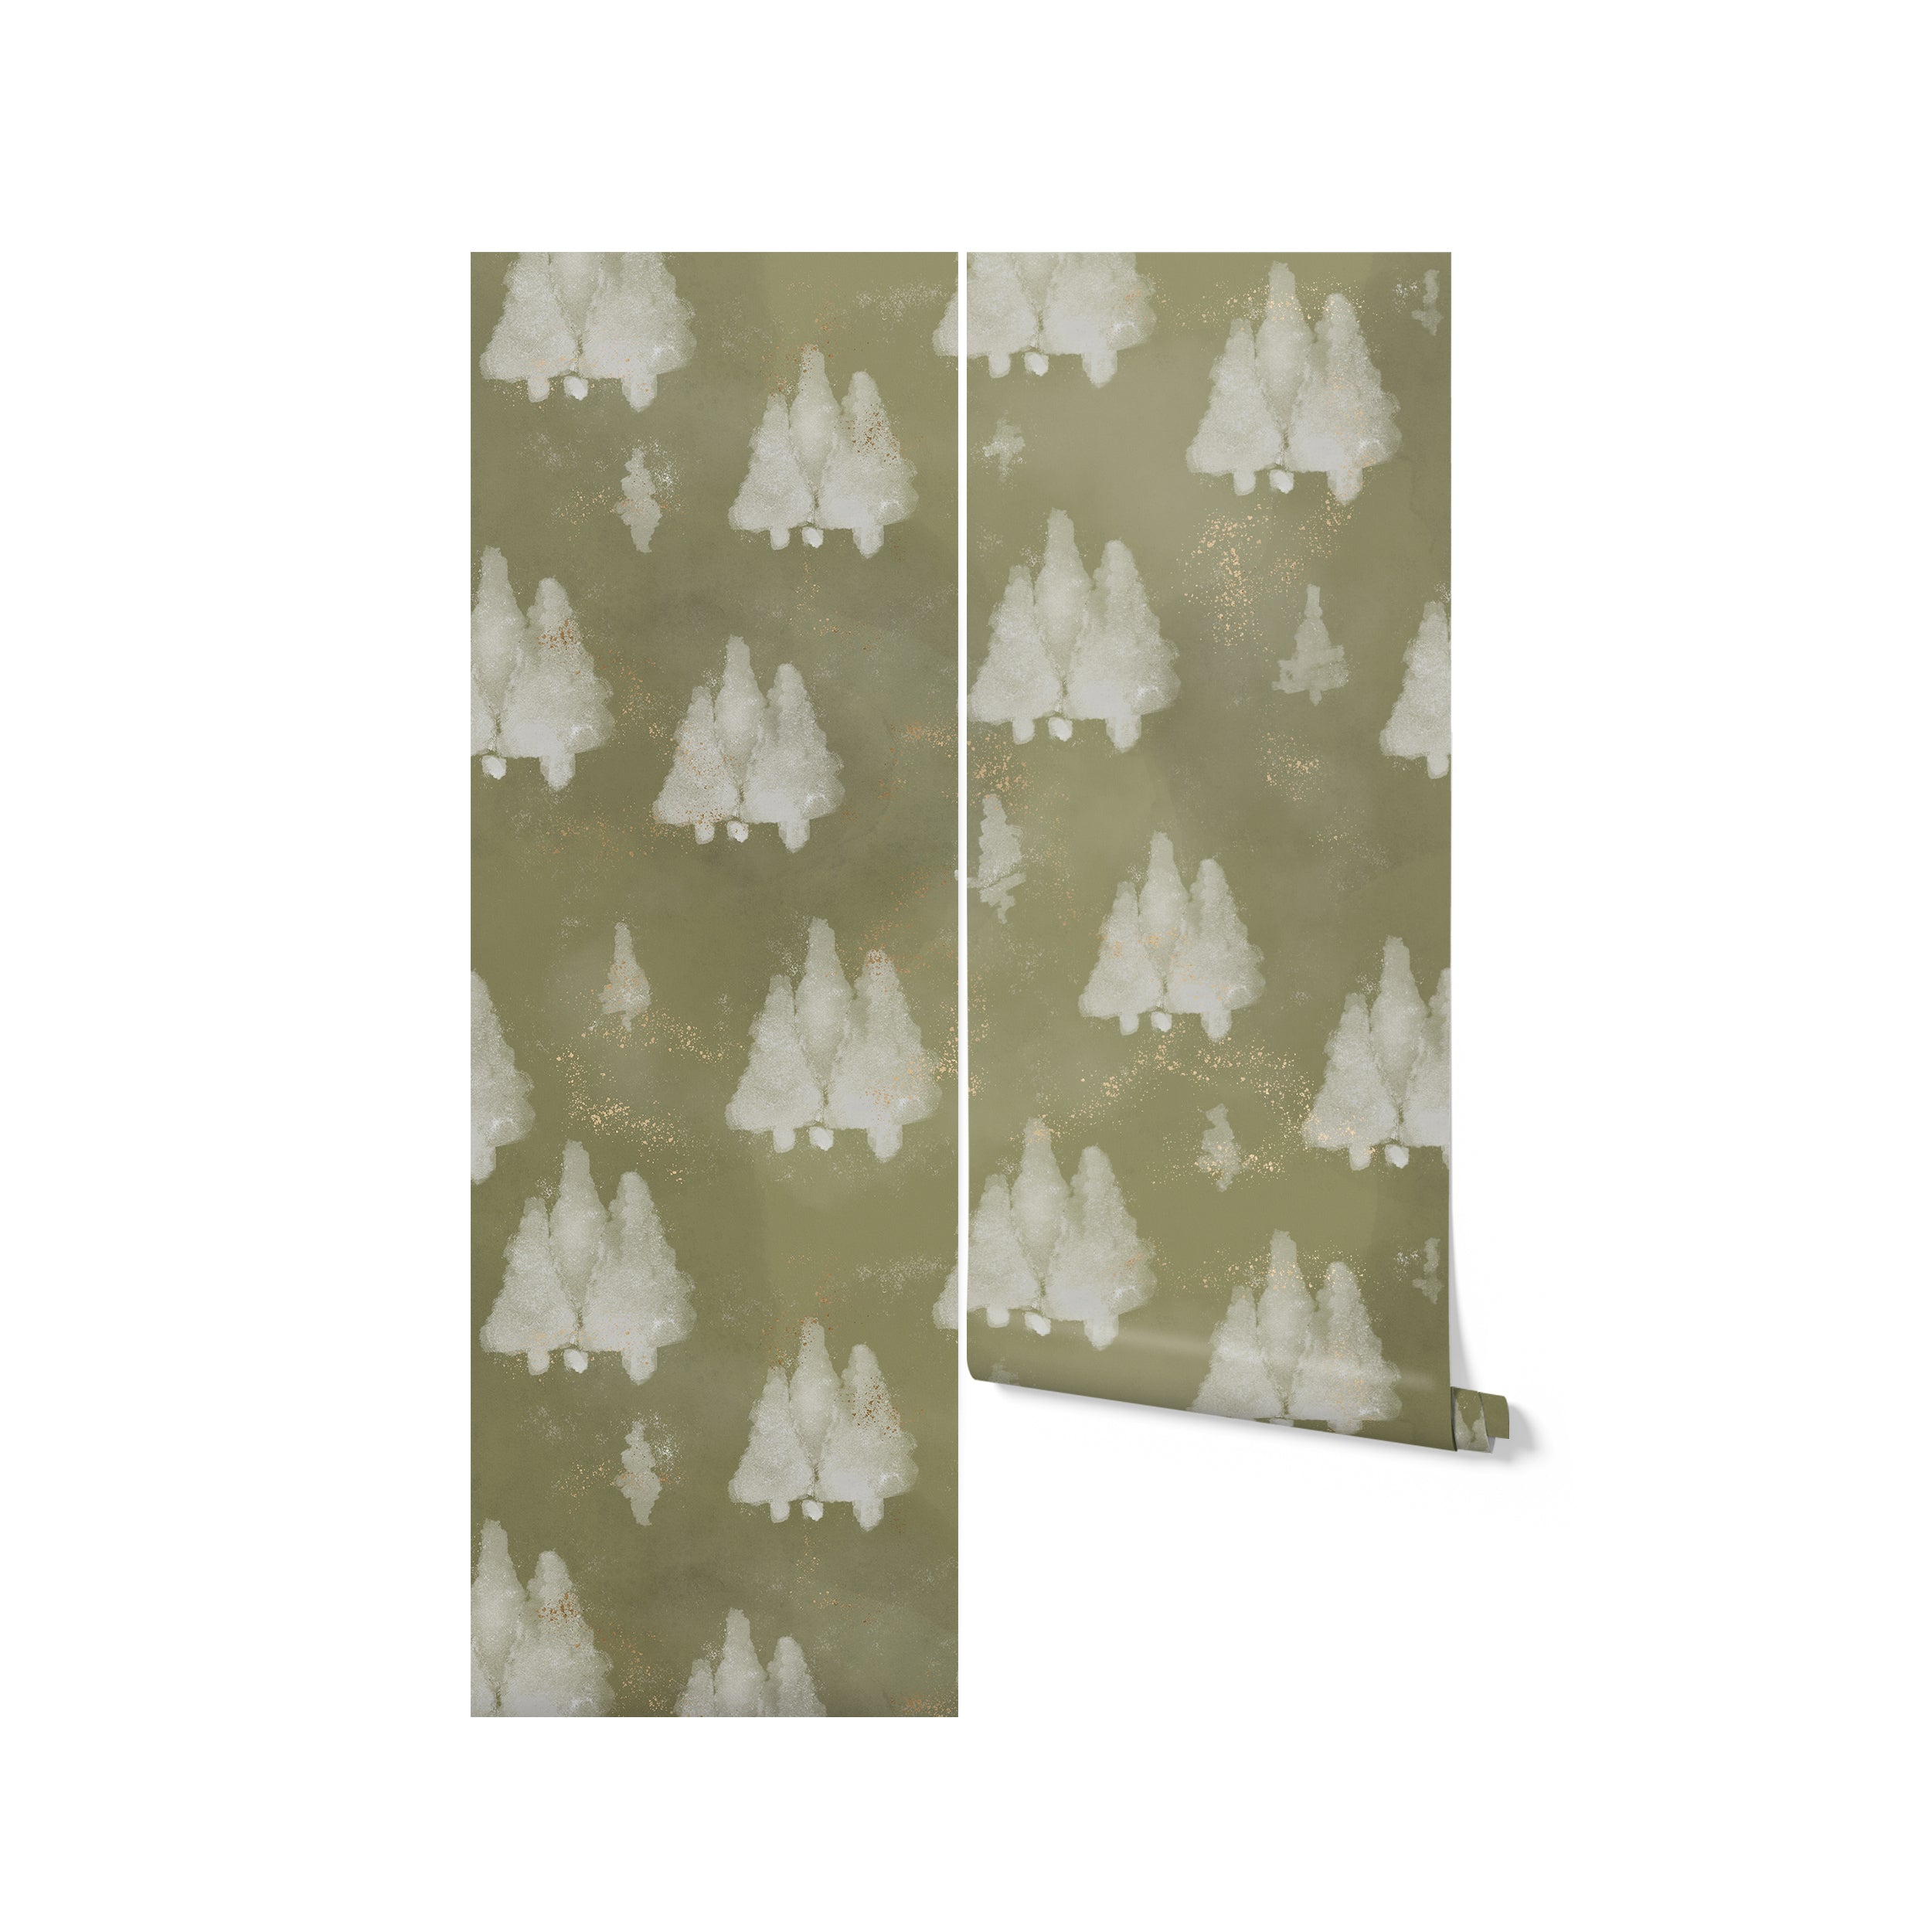 Rolls of Shimmer Tree Wallpaper showing a serene pattern of white trees on an olive green background, detailed with golden glitter accents. This wallpaper brings a touch of elegance and festive spirit to any room, suitable for both seasonal decor and year-round sophistication.